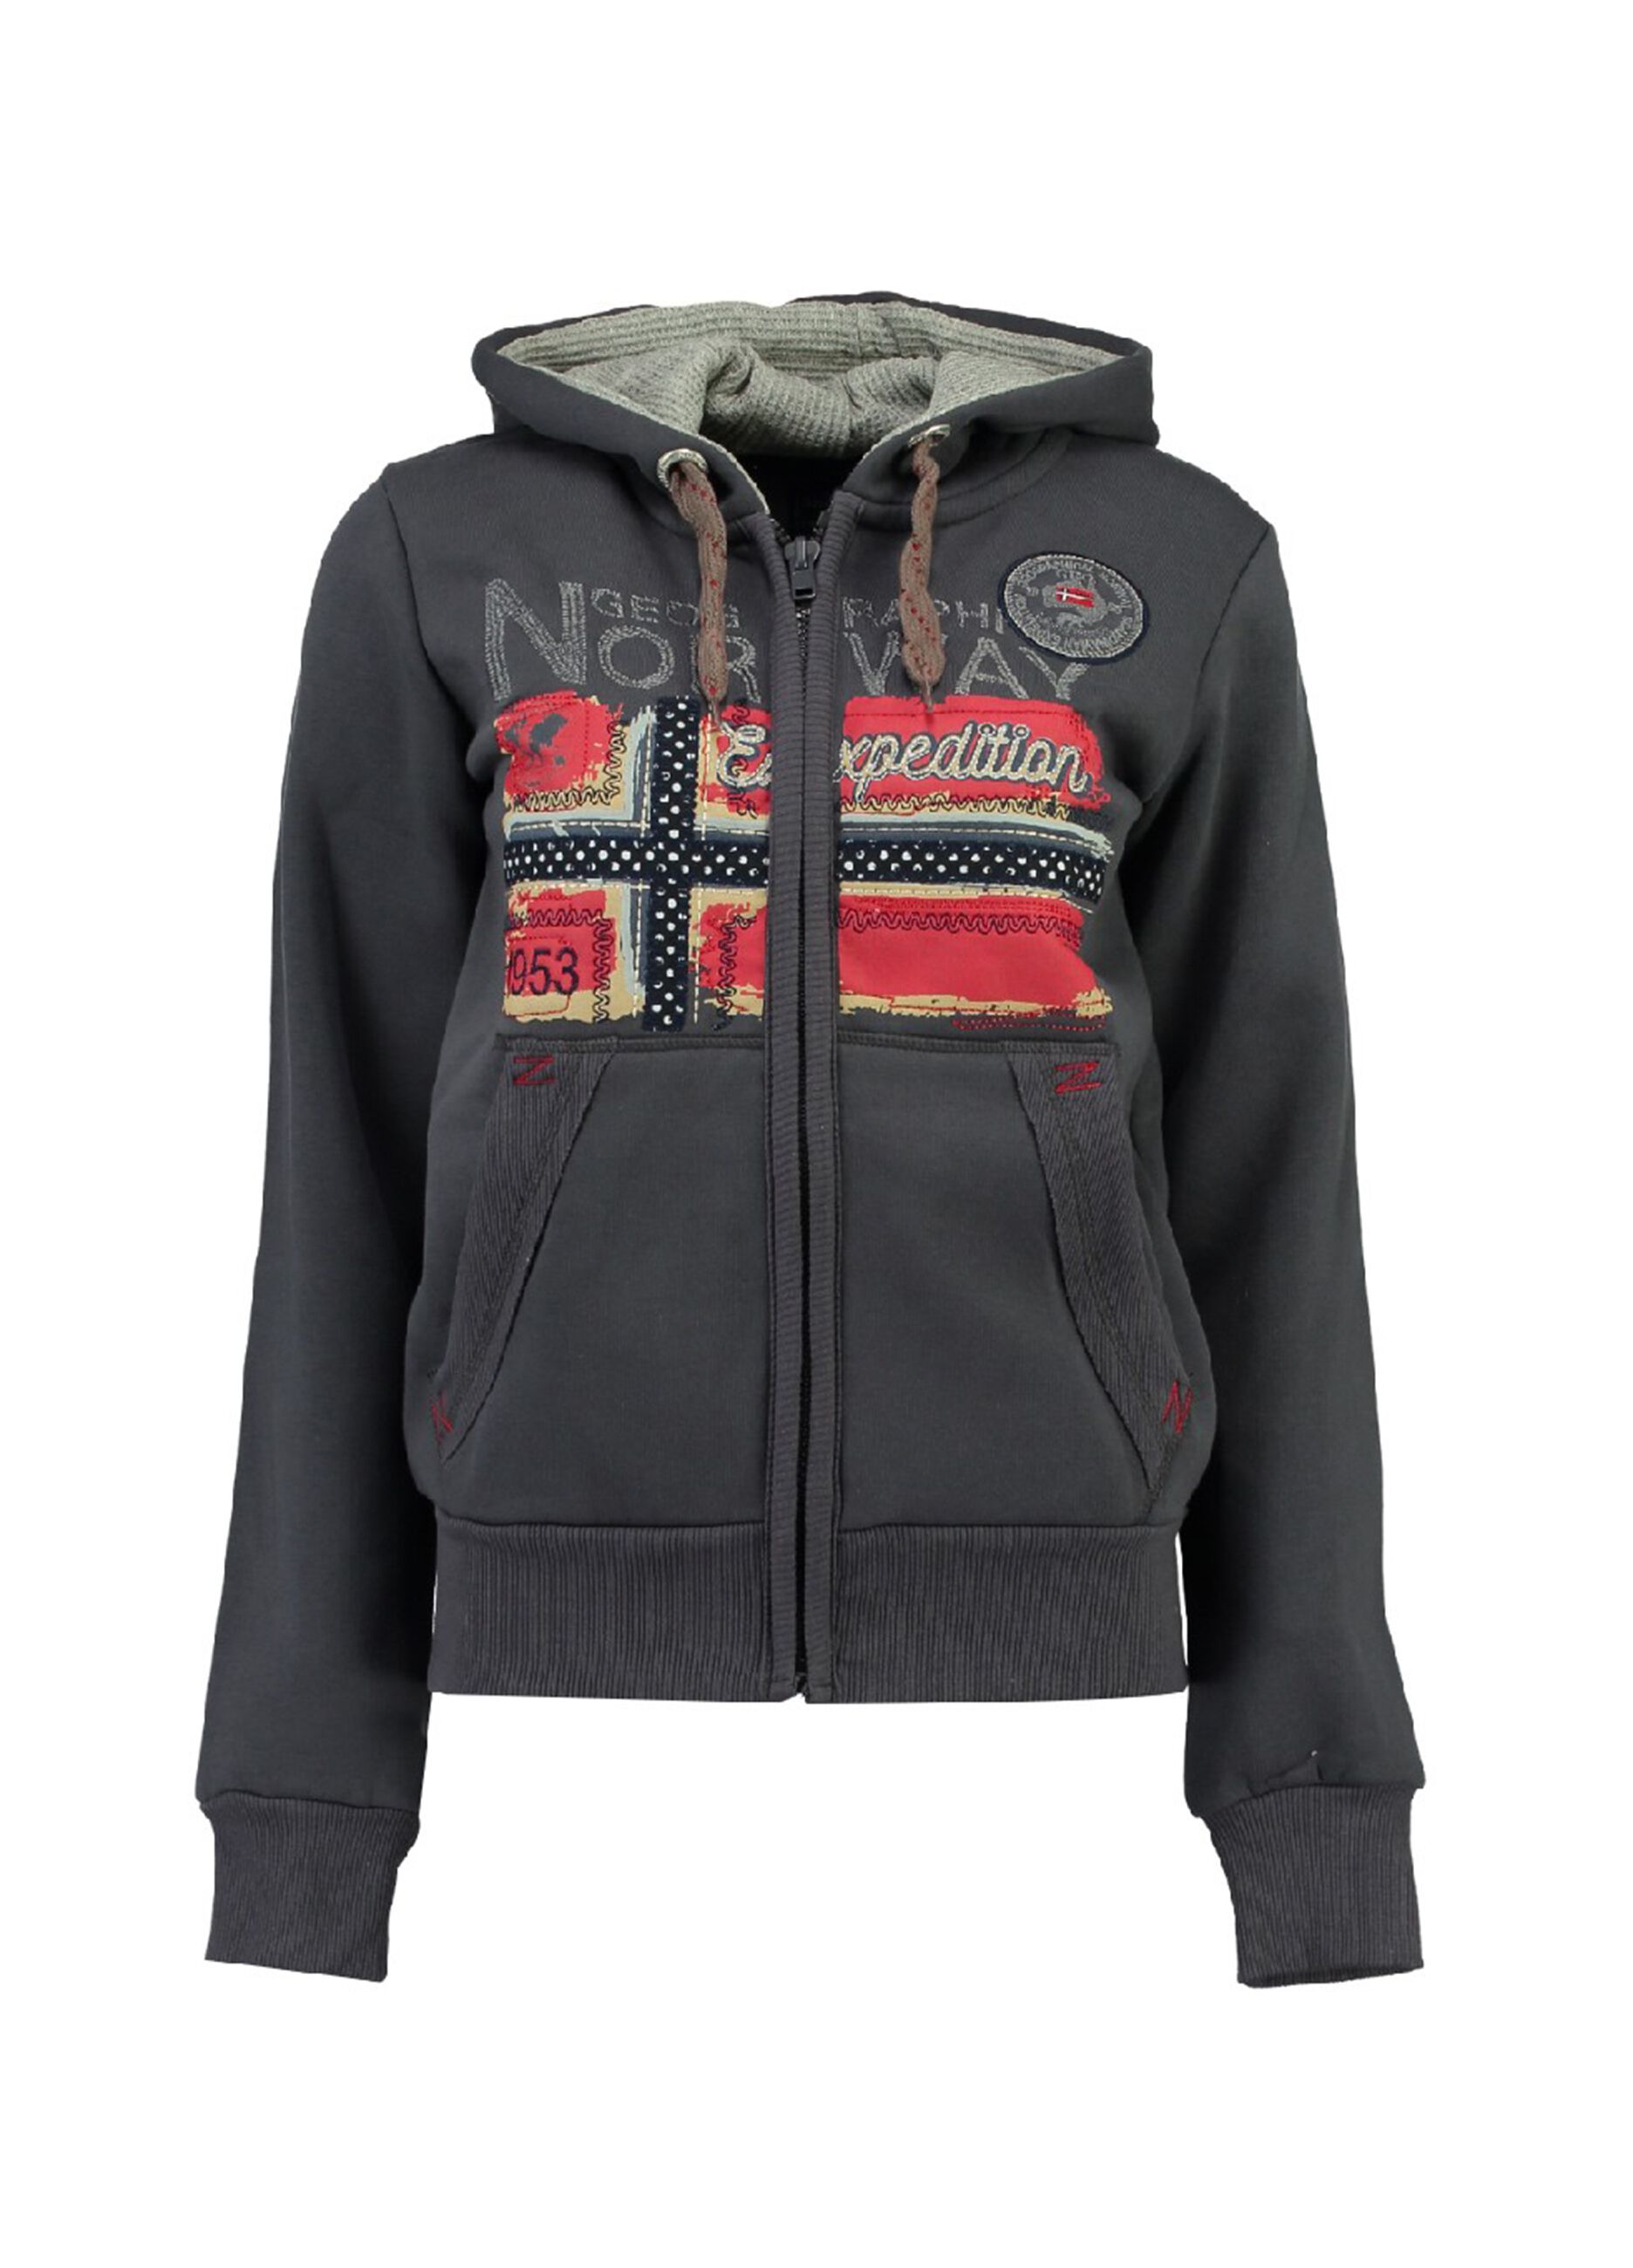 Full-zip with hood and Geographical Norway print